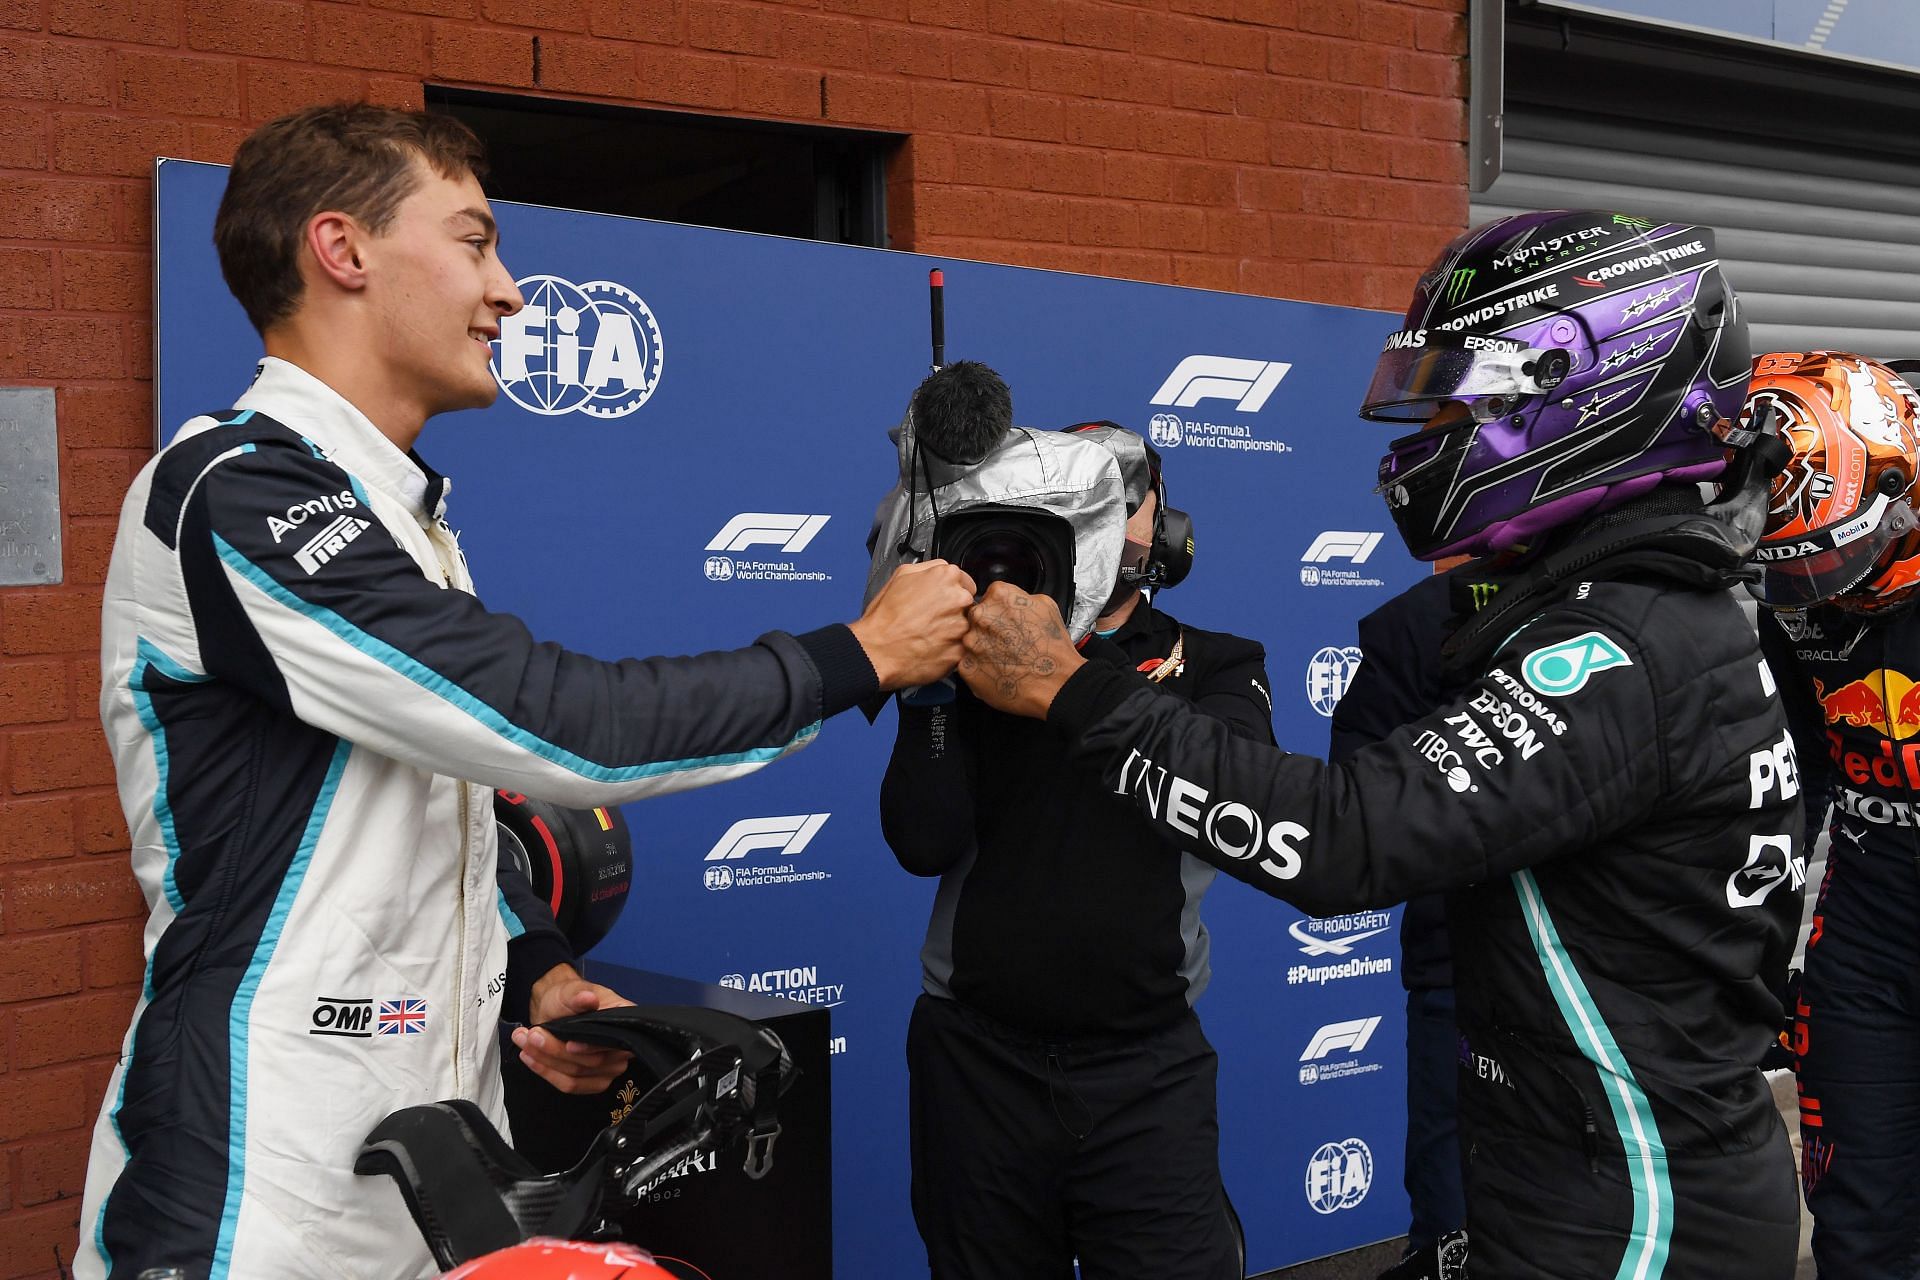 George Russell and Lewis Hamilton could form a potentially combustible partnership at Mercedes. Photo by John Thys - Pool/Getty Images